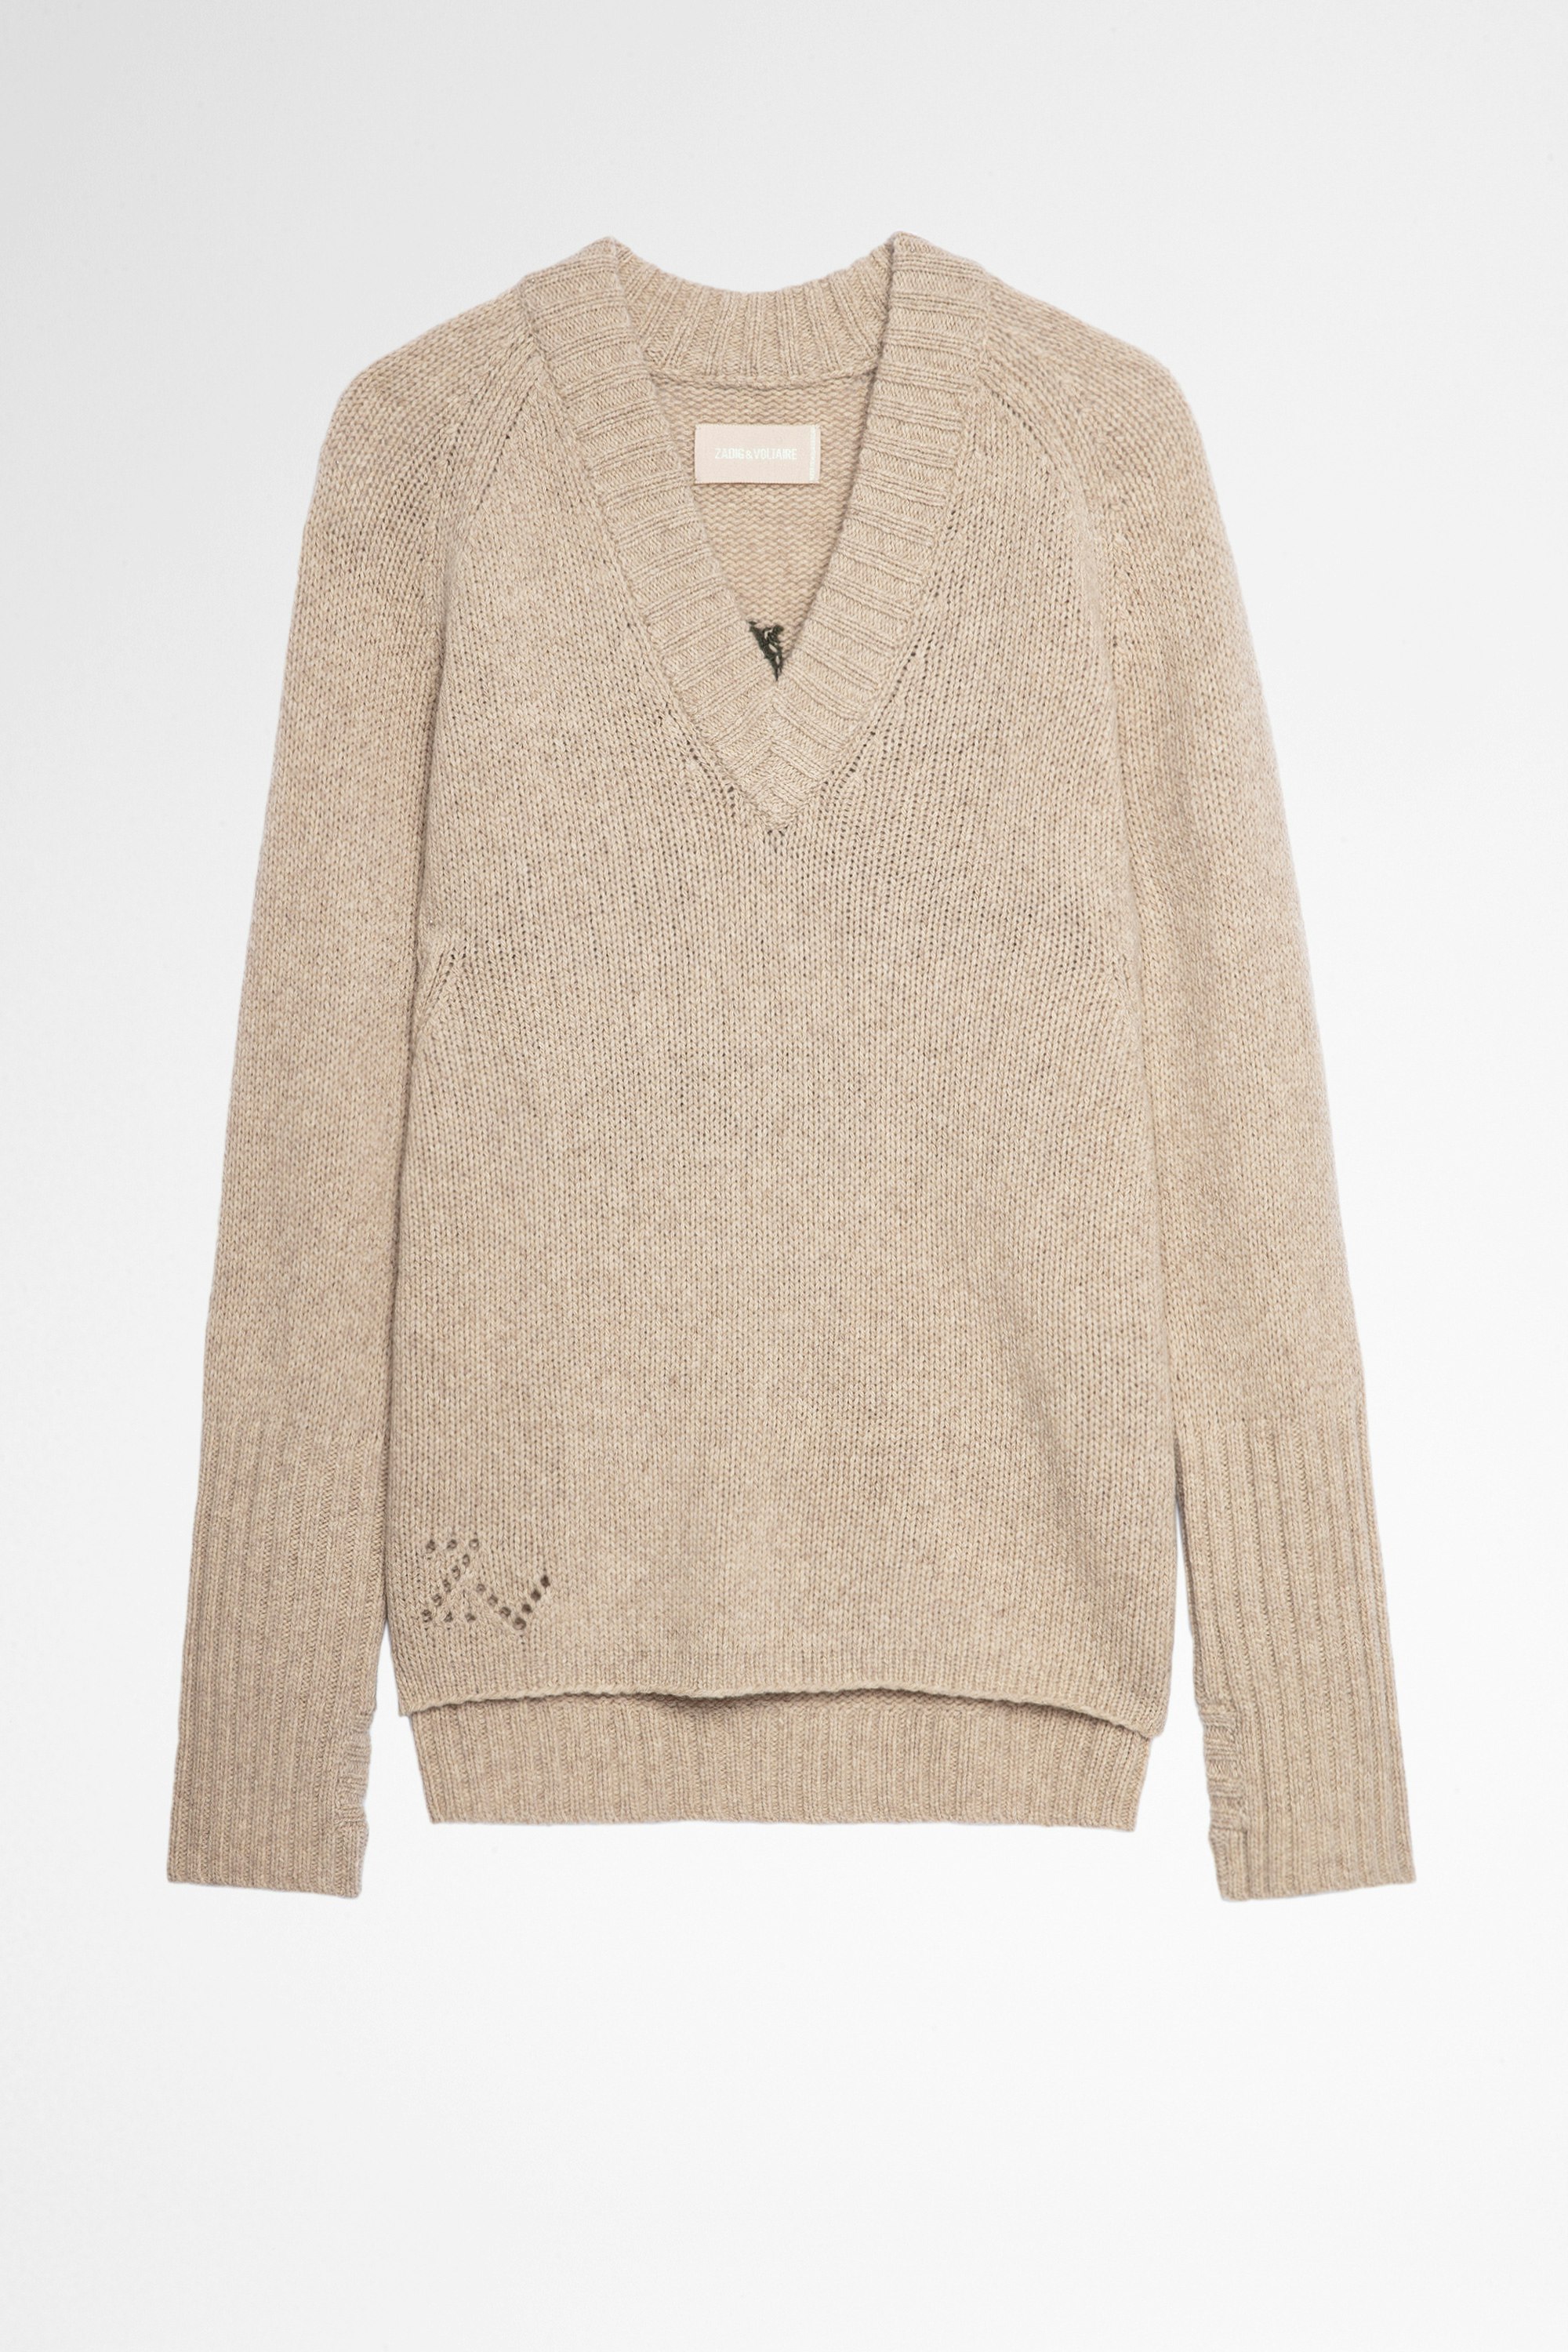 Valmy Sweater Women's beige merino sweater with cowboy on the back